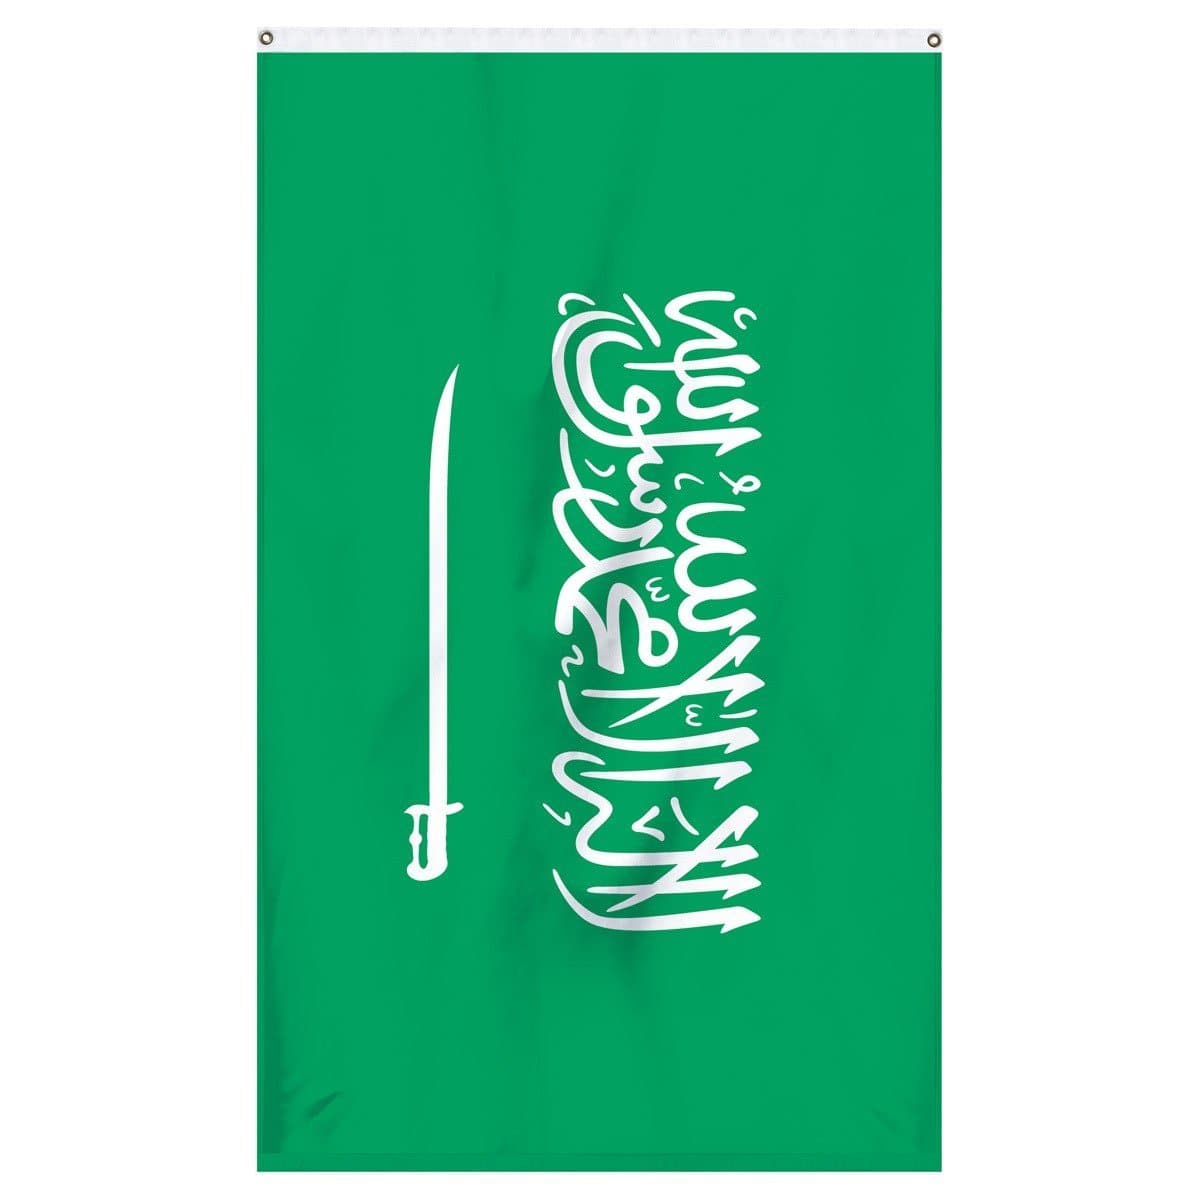 Saudi Arabia National Flag for sale to buy online from Atlantic Flag and Pole. Green flag with white lettering.